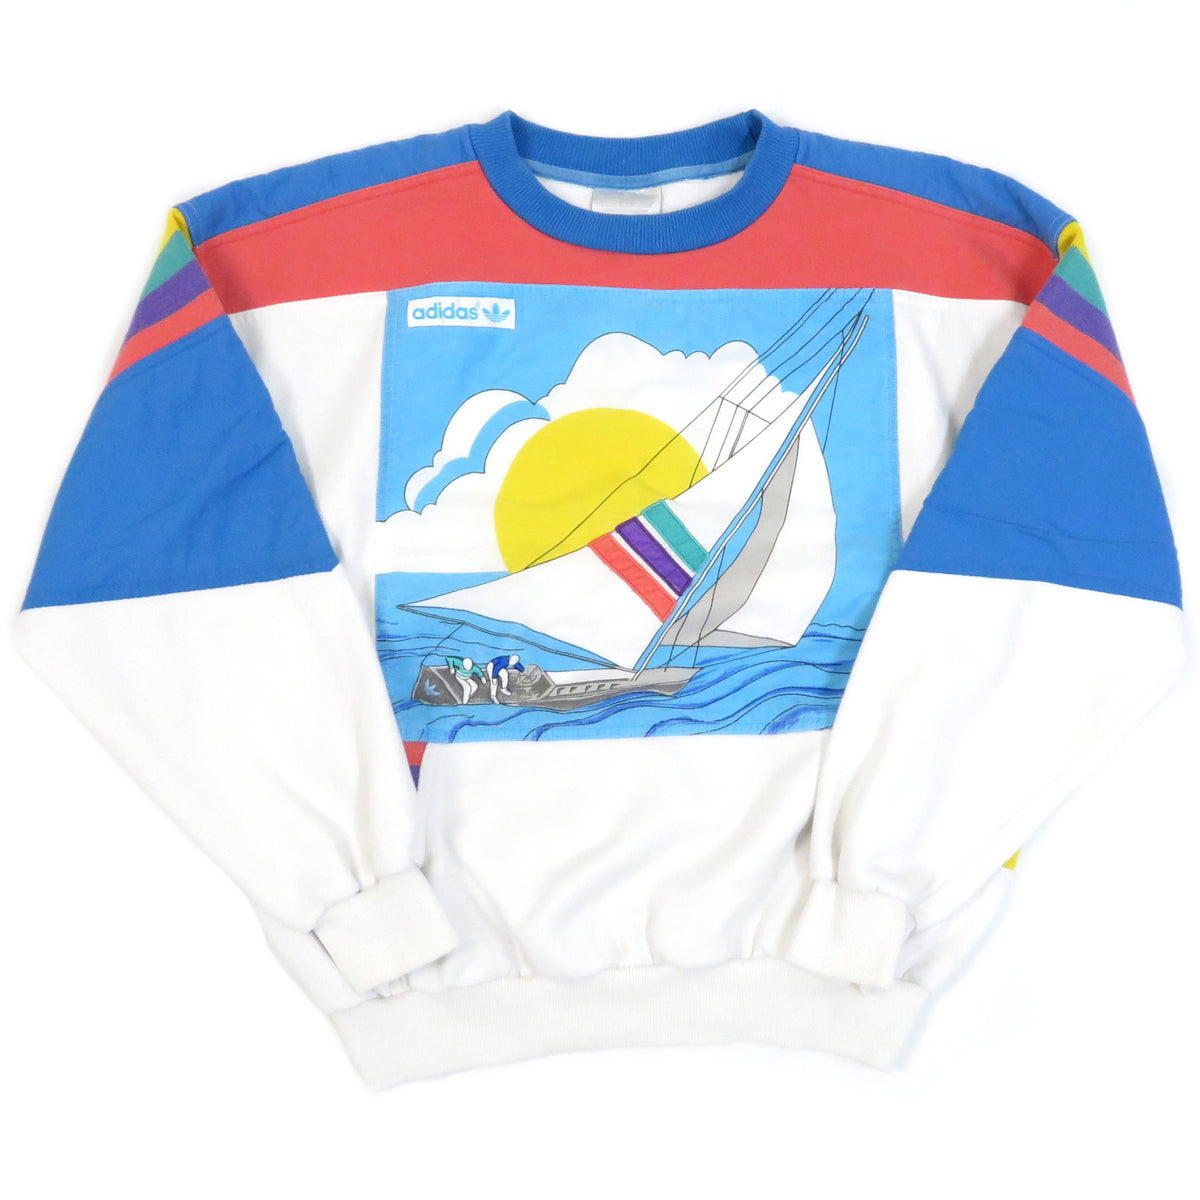 Vintage Adidas Crewneck. Fits like a M/L. Available in Store and